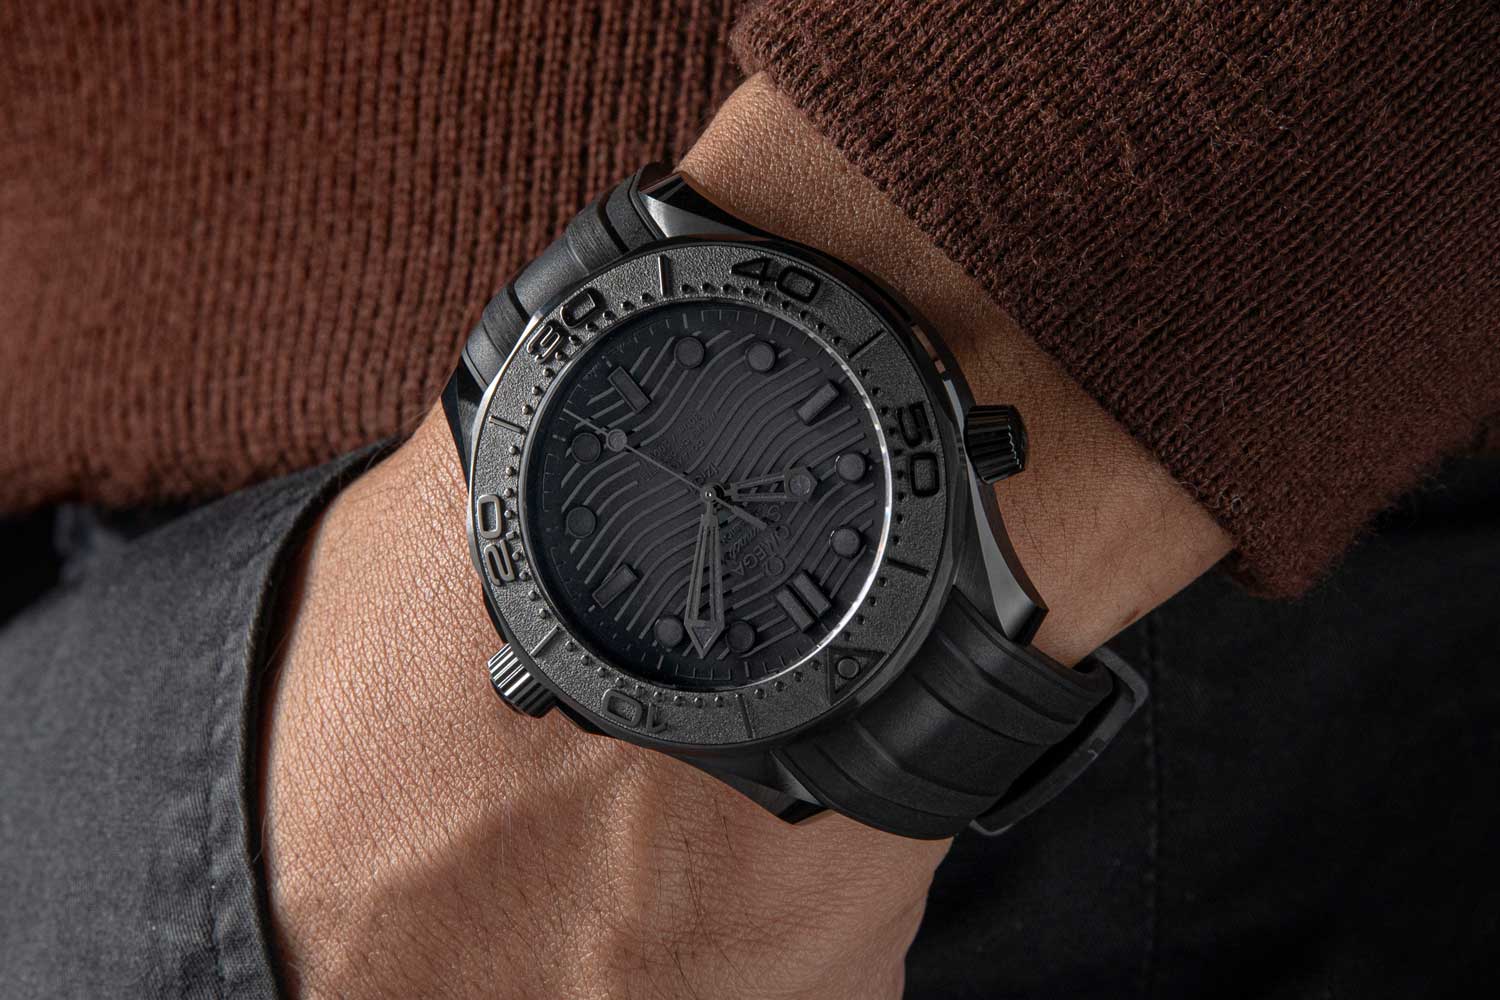 The Omega Seamaster Black Black Diver 300 has a matt surface decorated with a unique pattern that resembles “dinosaur skin”. It has the added advantage of not showing fingerprints. (©Revolution)